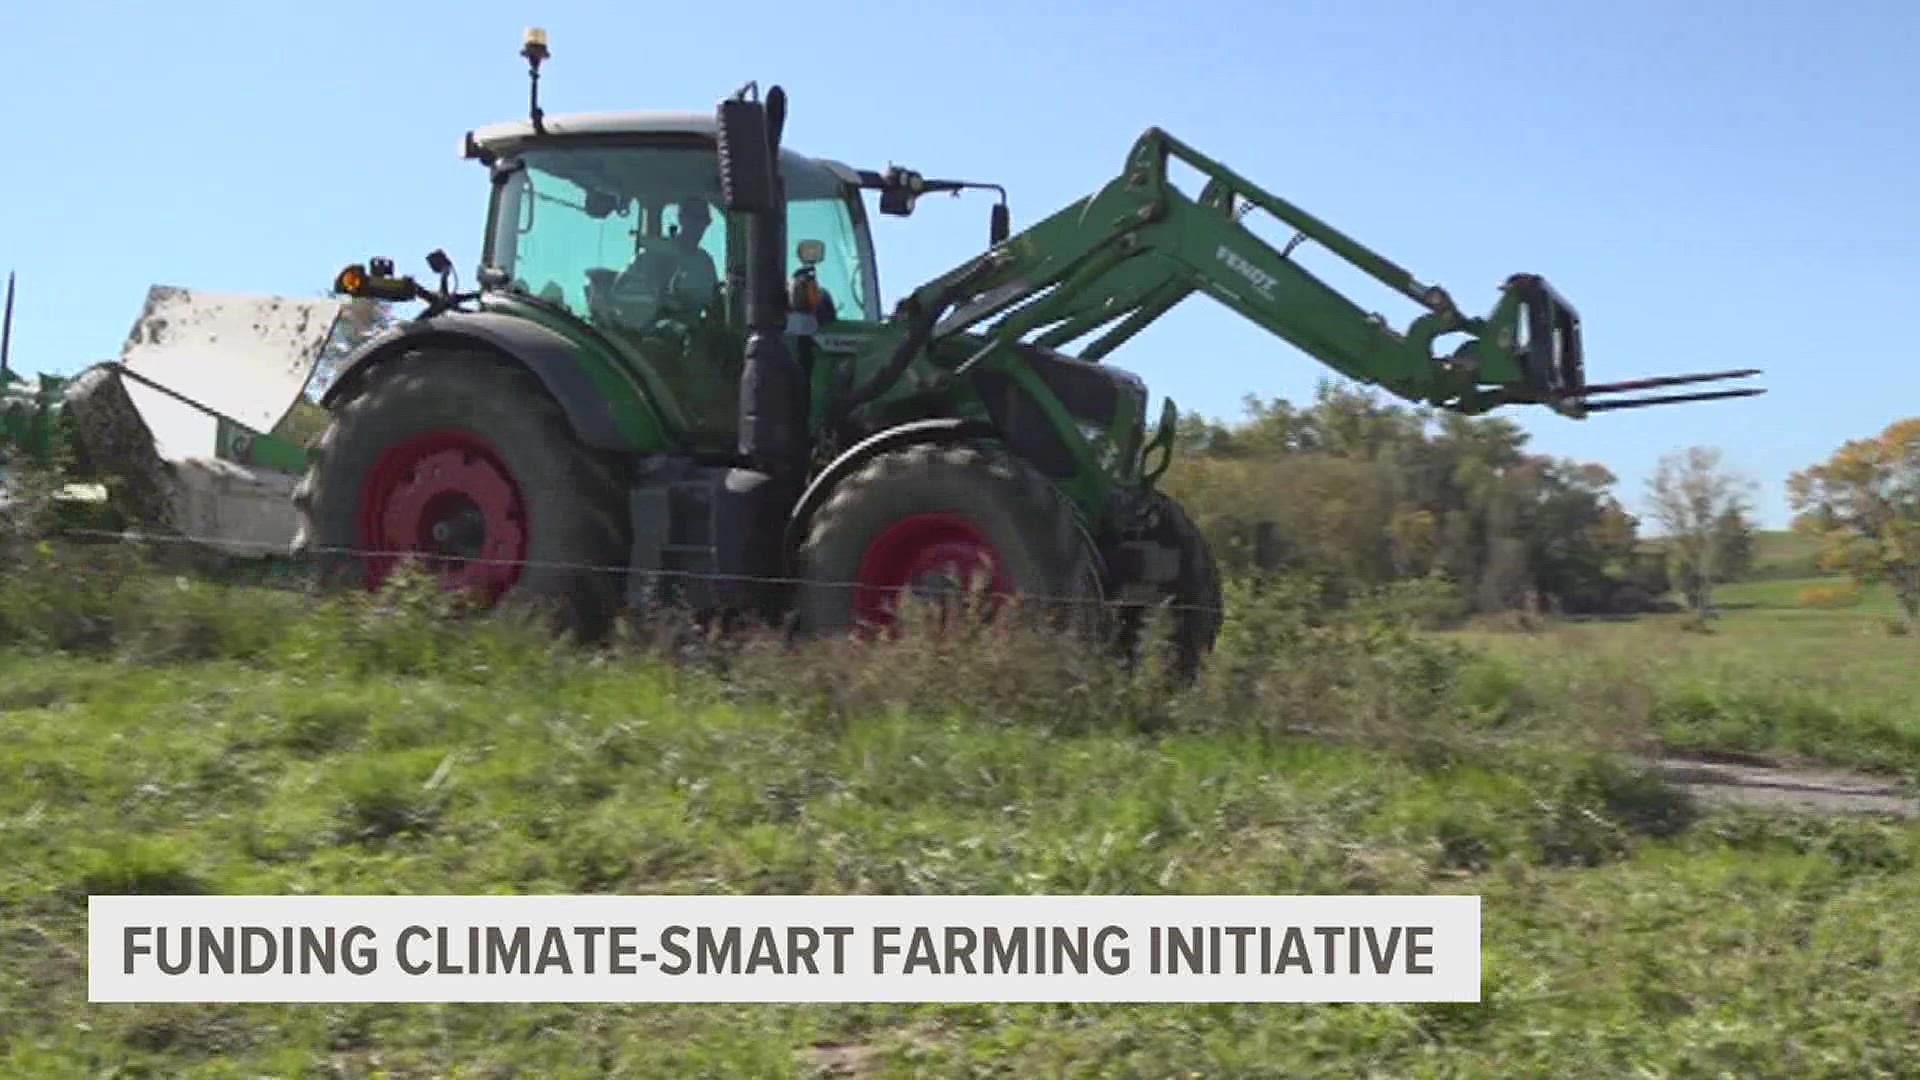 Funding from the USDA to Pasa Sustainable Agriculture will be invested in local farmers impacted by climate change.